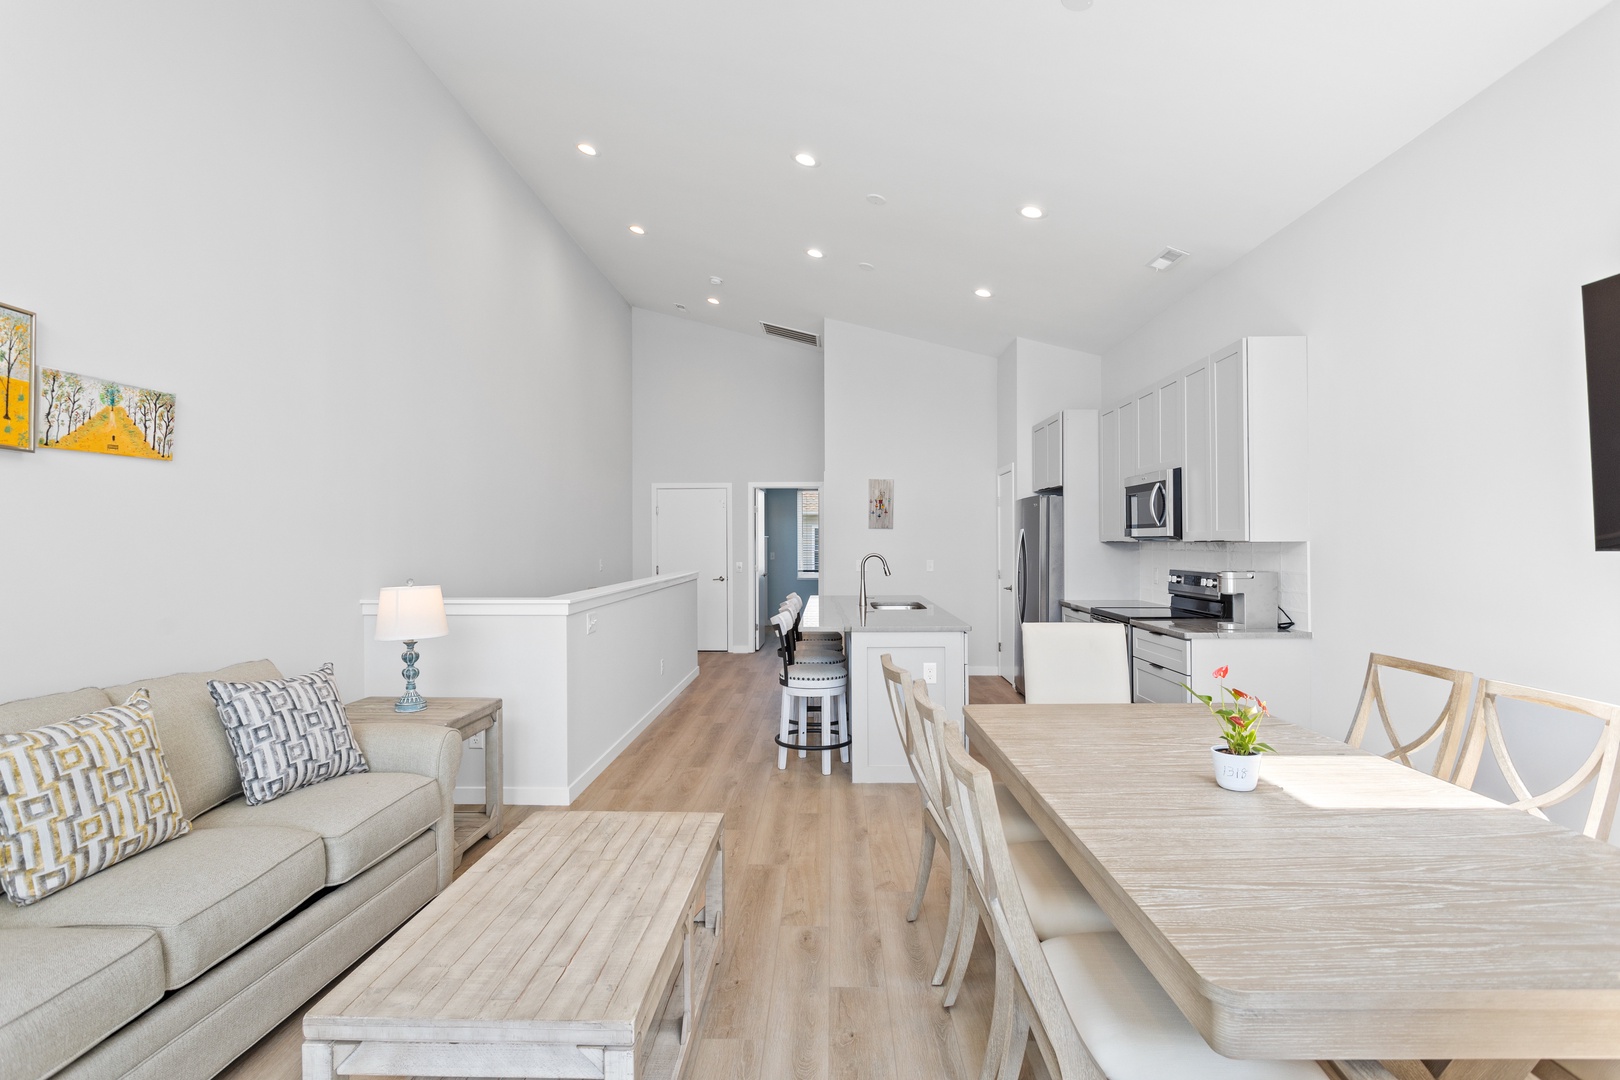 The open living, kitchen, and dining areas with a Smart TV and balcony access